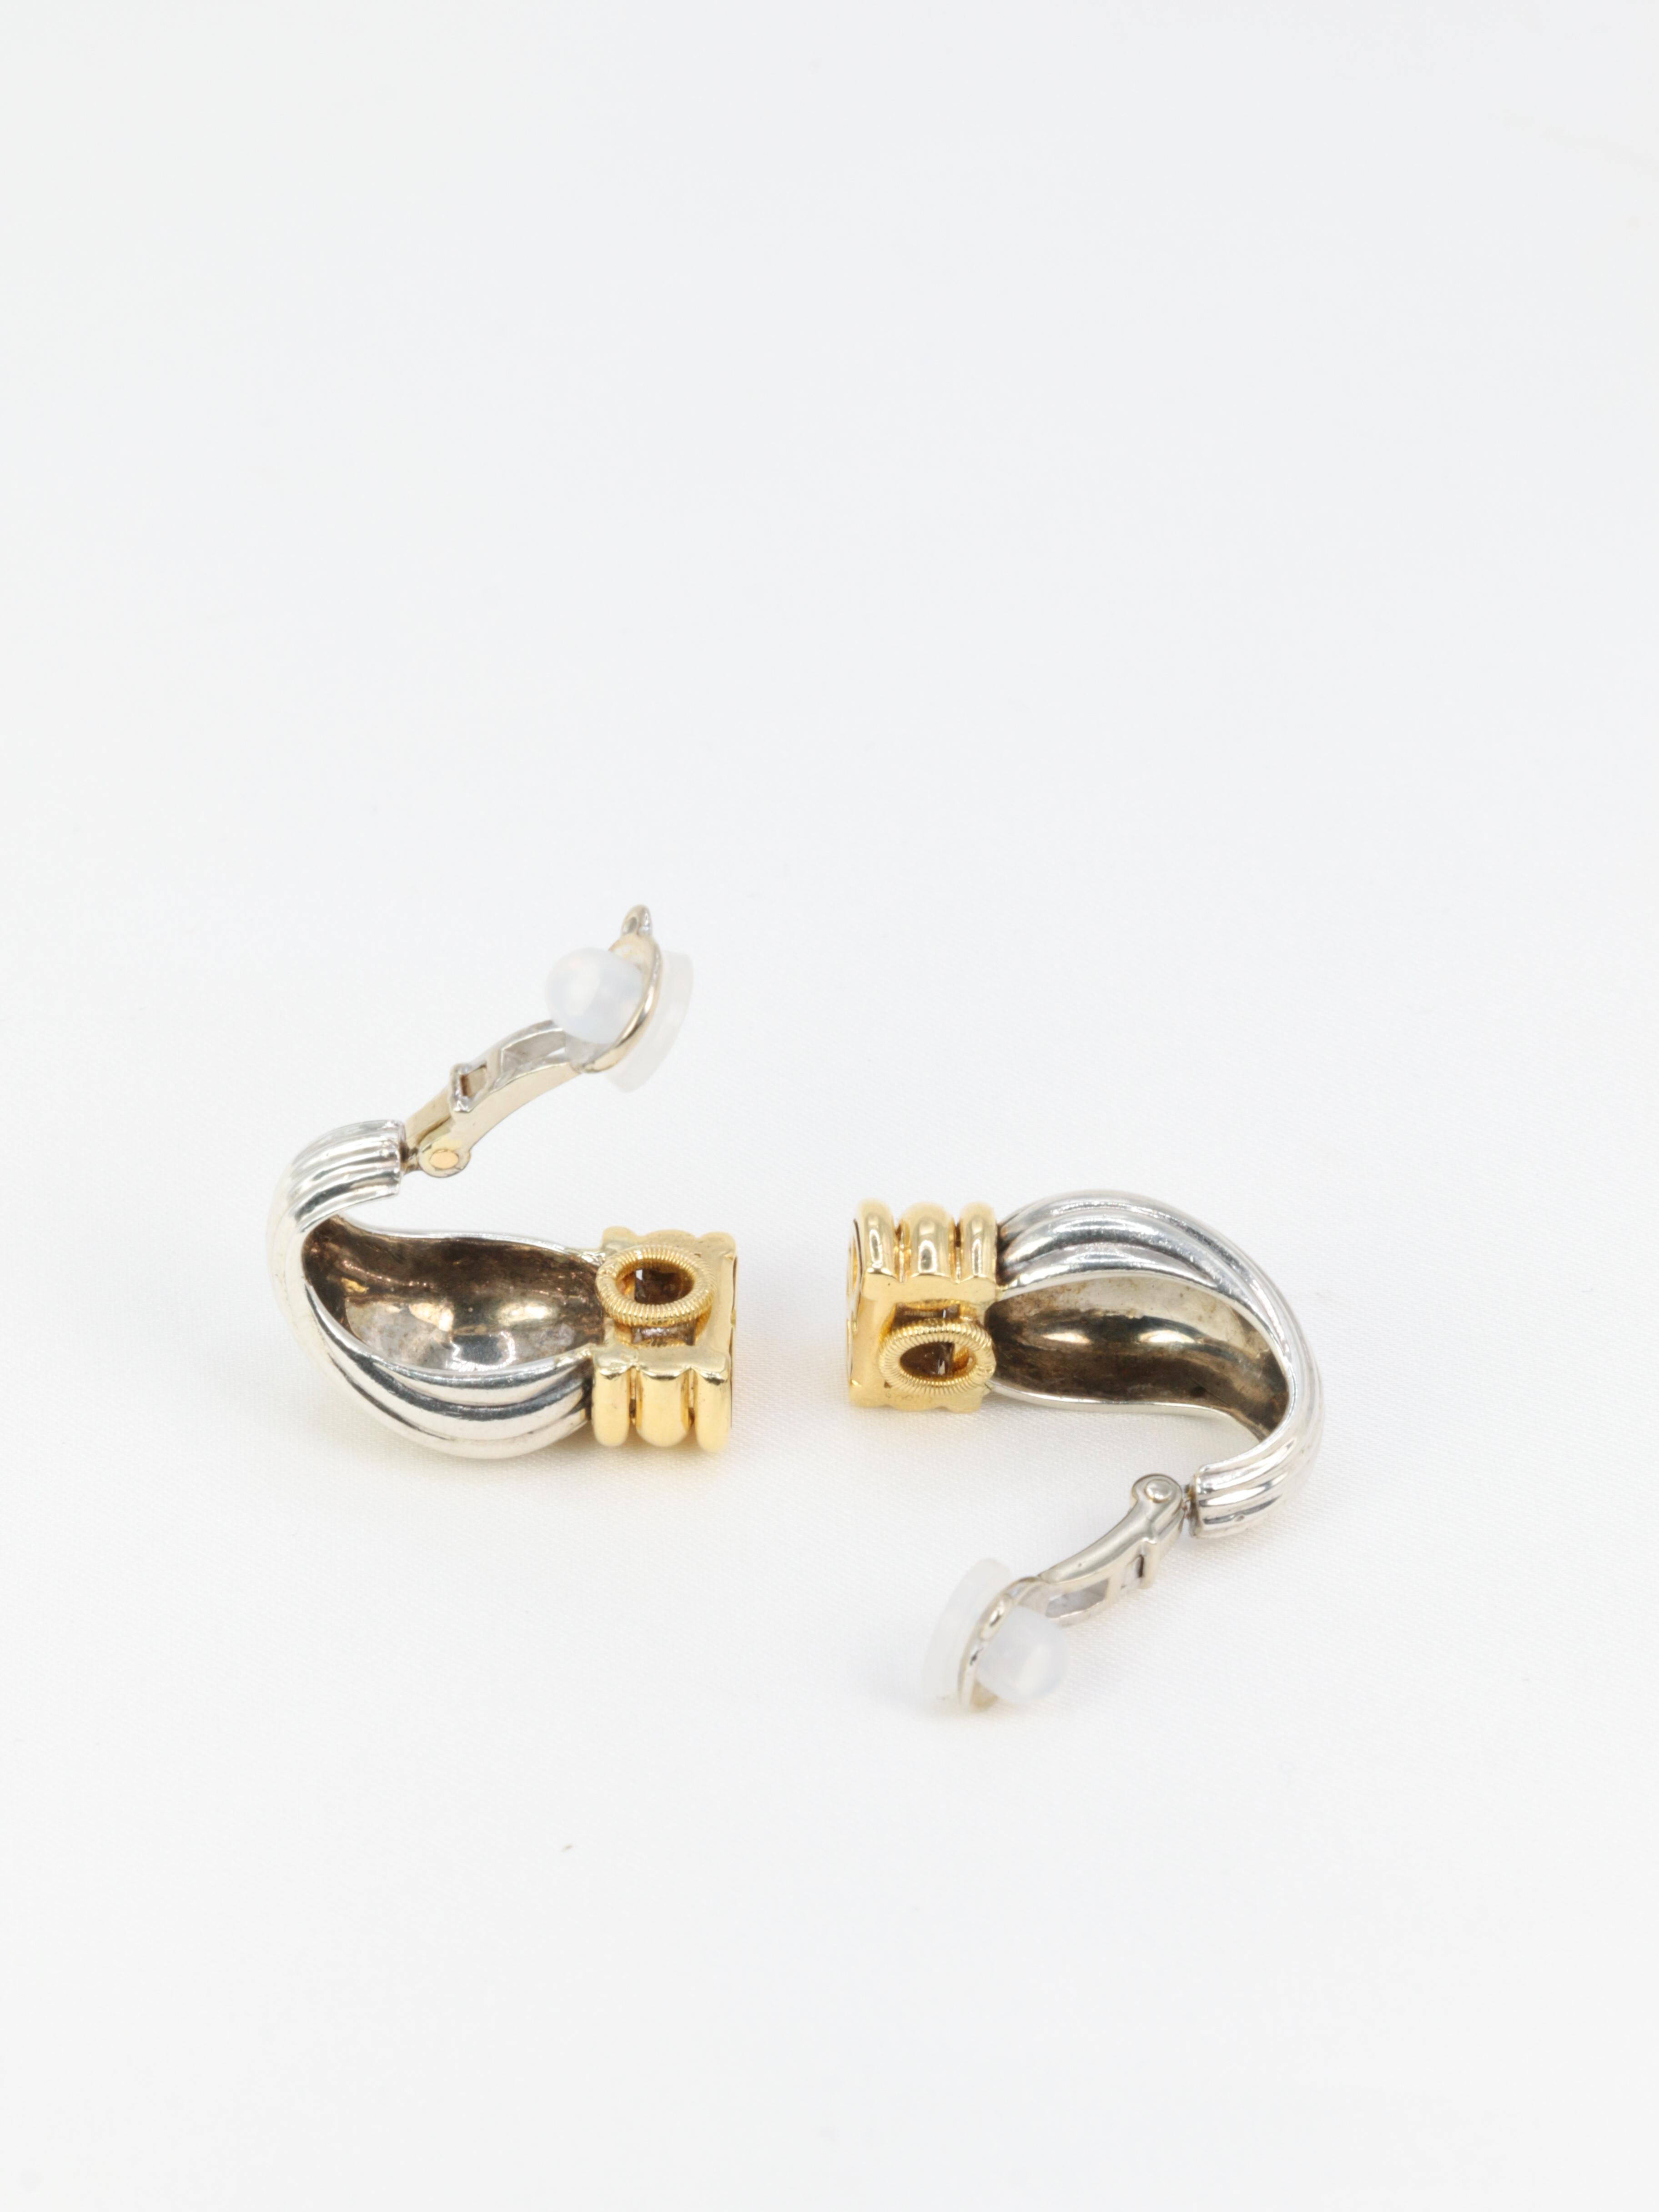 Oj Perrin Gold and Silver Earrings For Sale 2